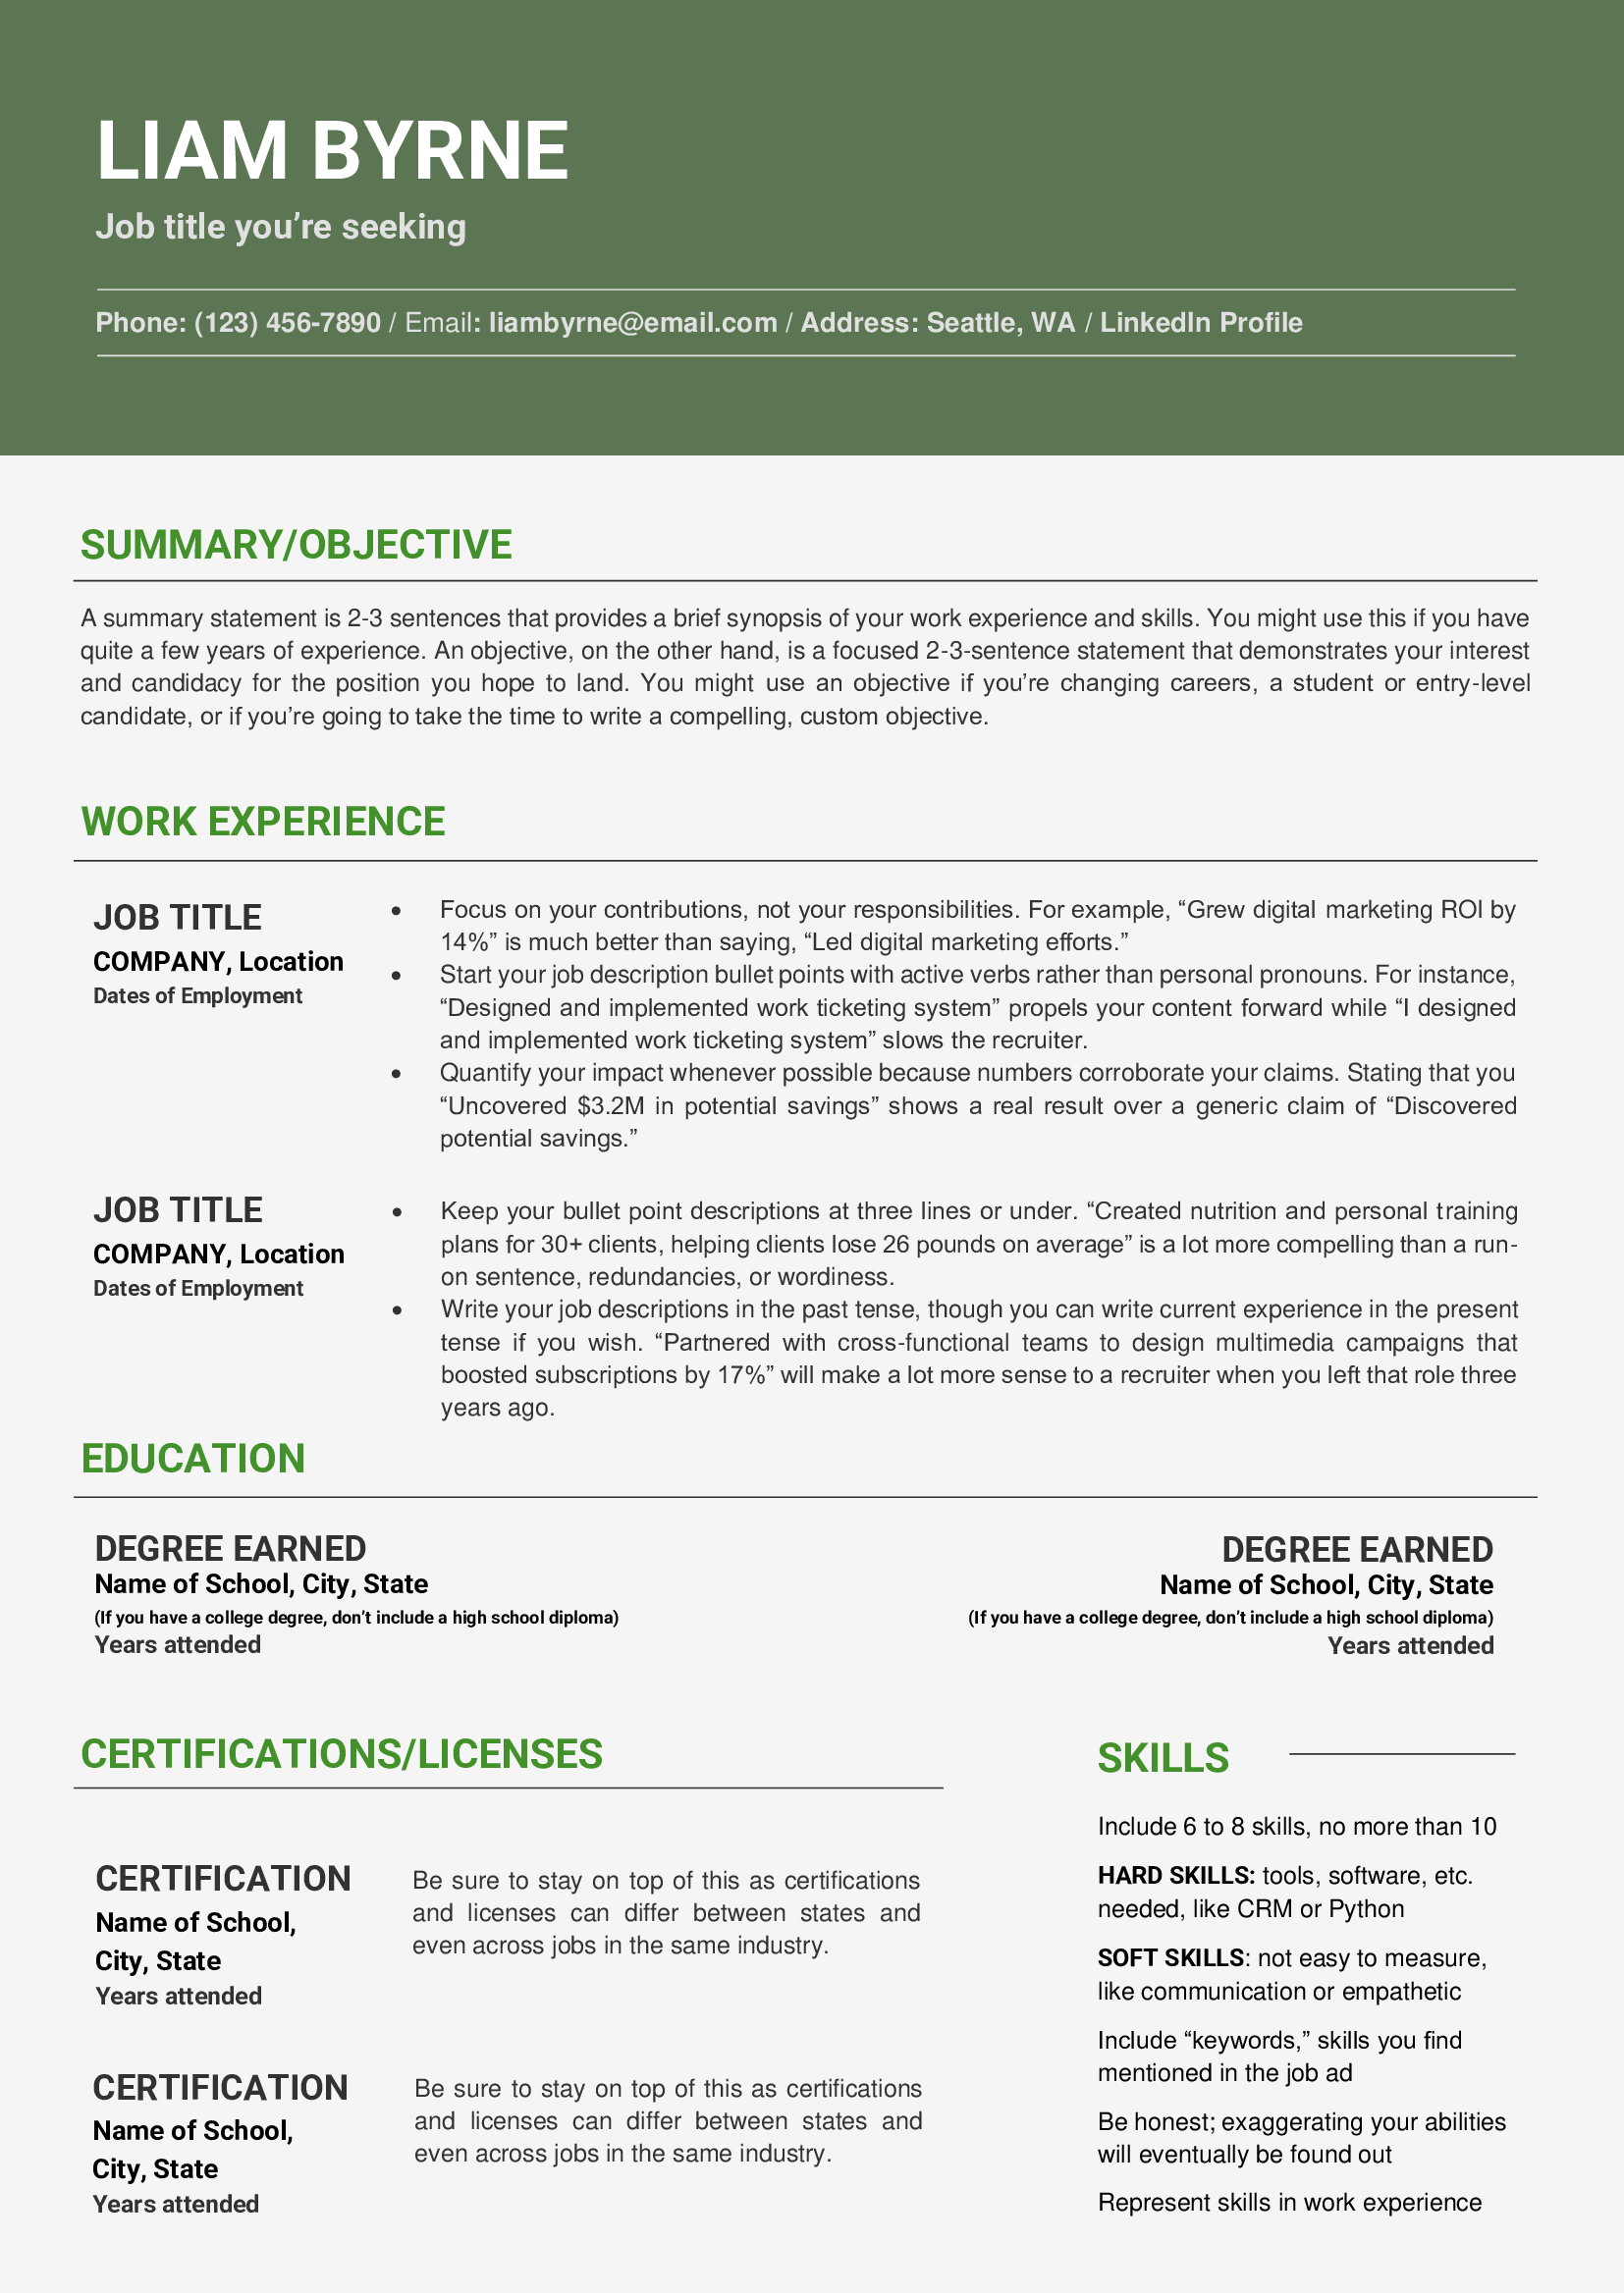 Word resume template for technology